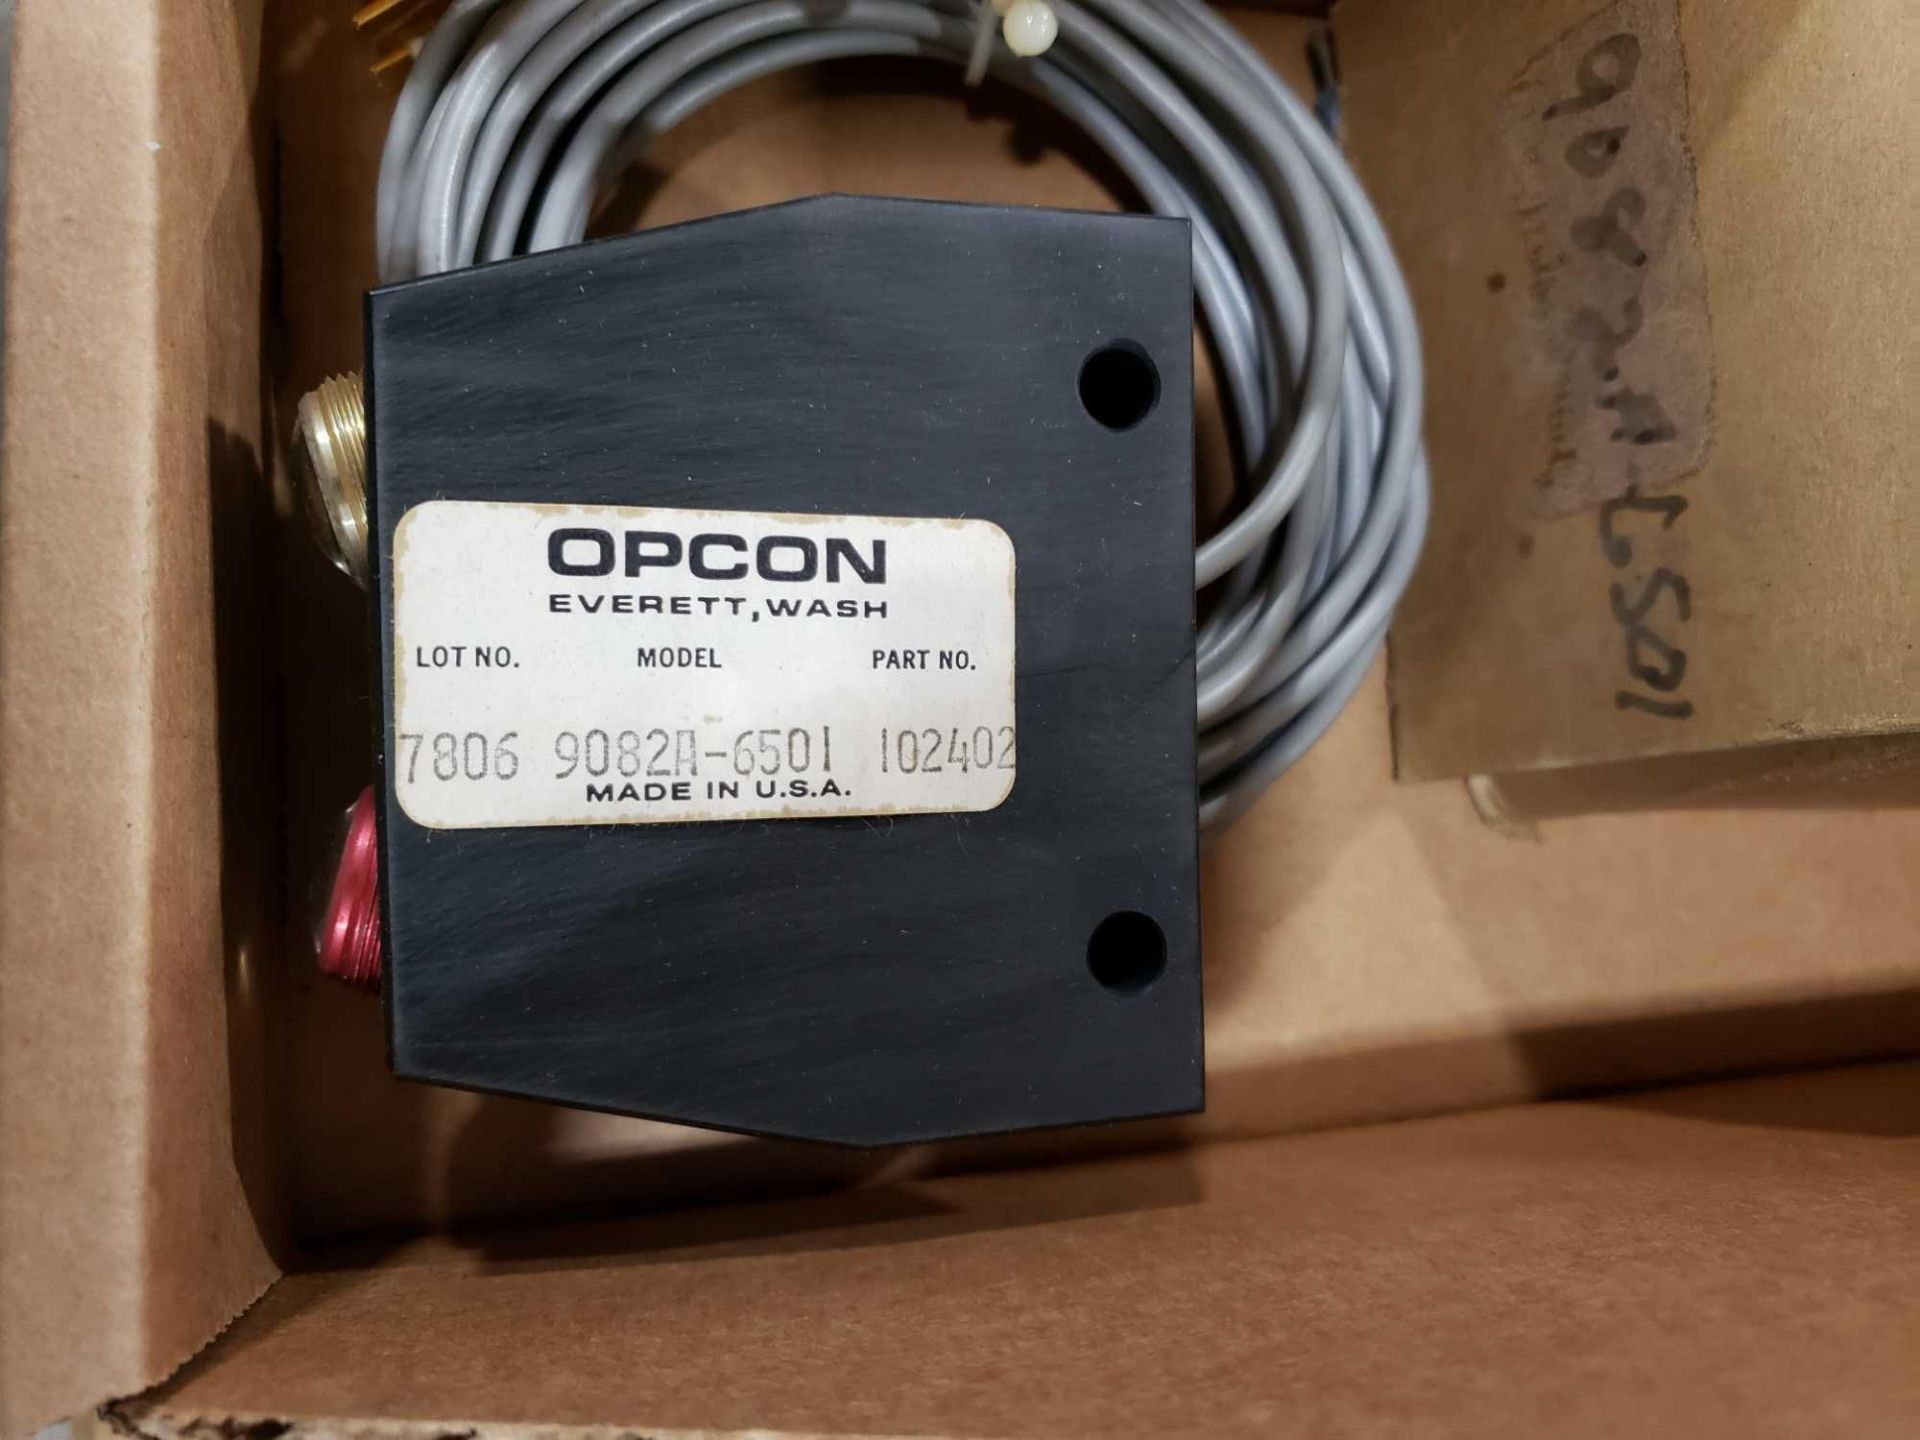 Opcon model 9082A-6501, part number 102402. New in box. - Image 2 of 2